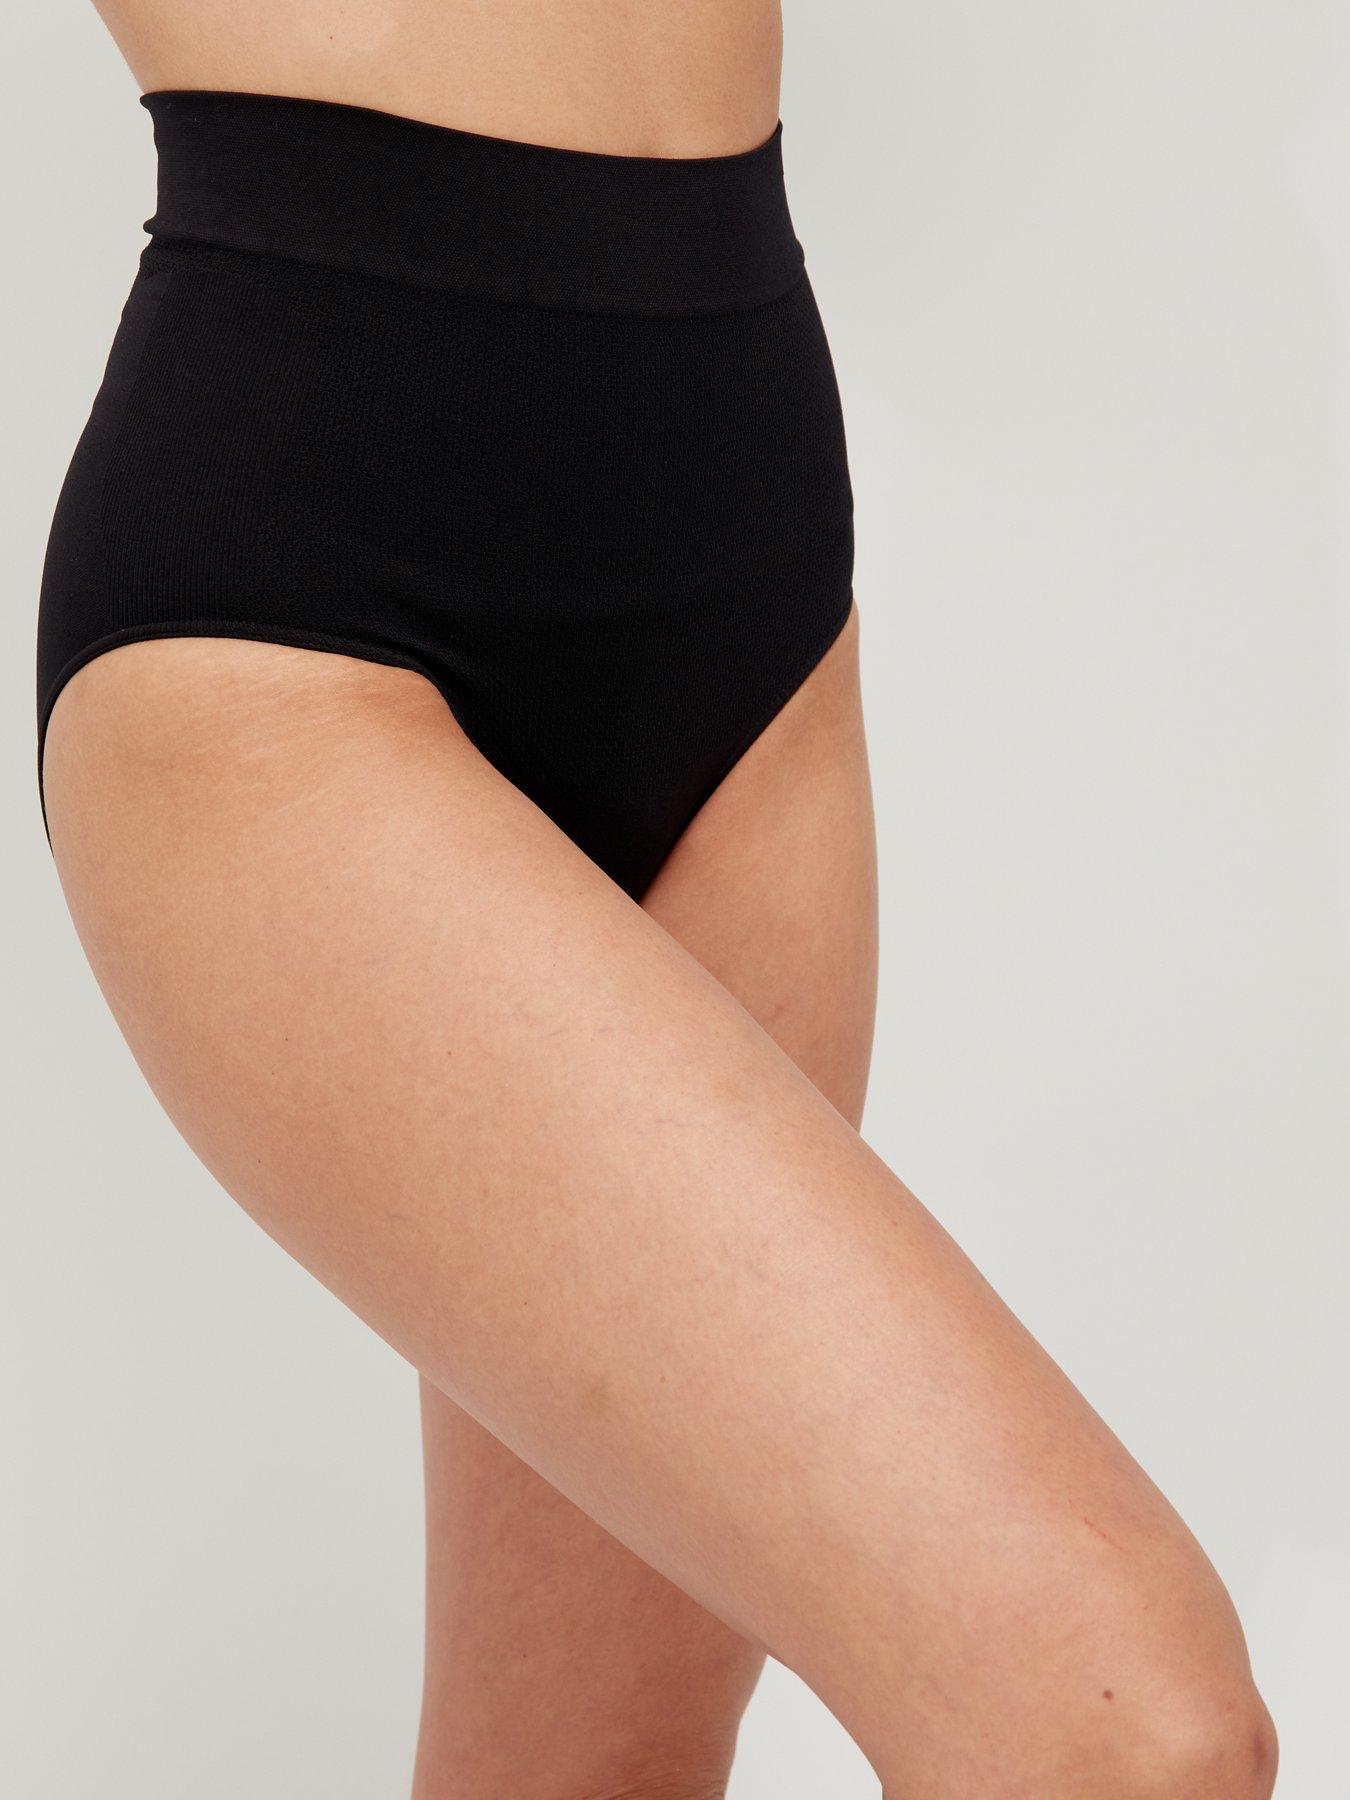 Spanx Everyday Seamless Shaping High Waisted Short - Black